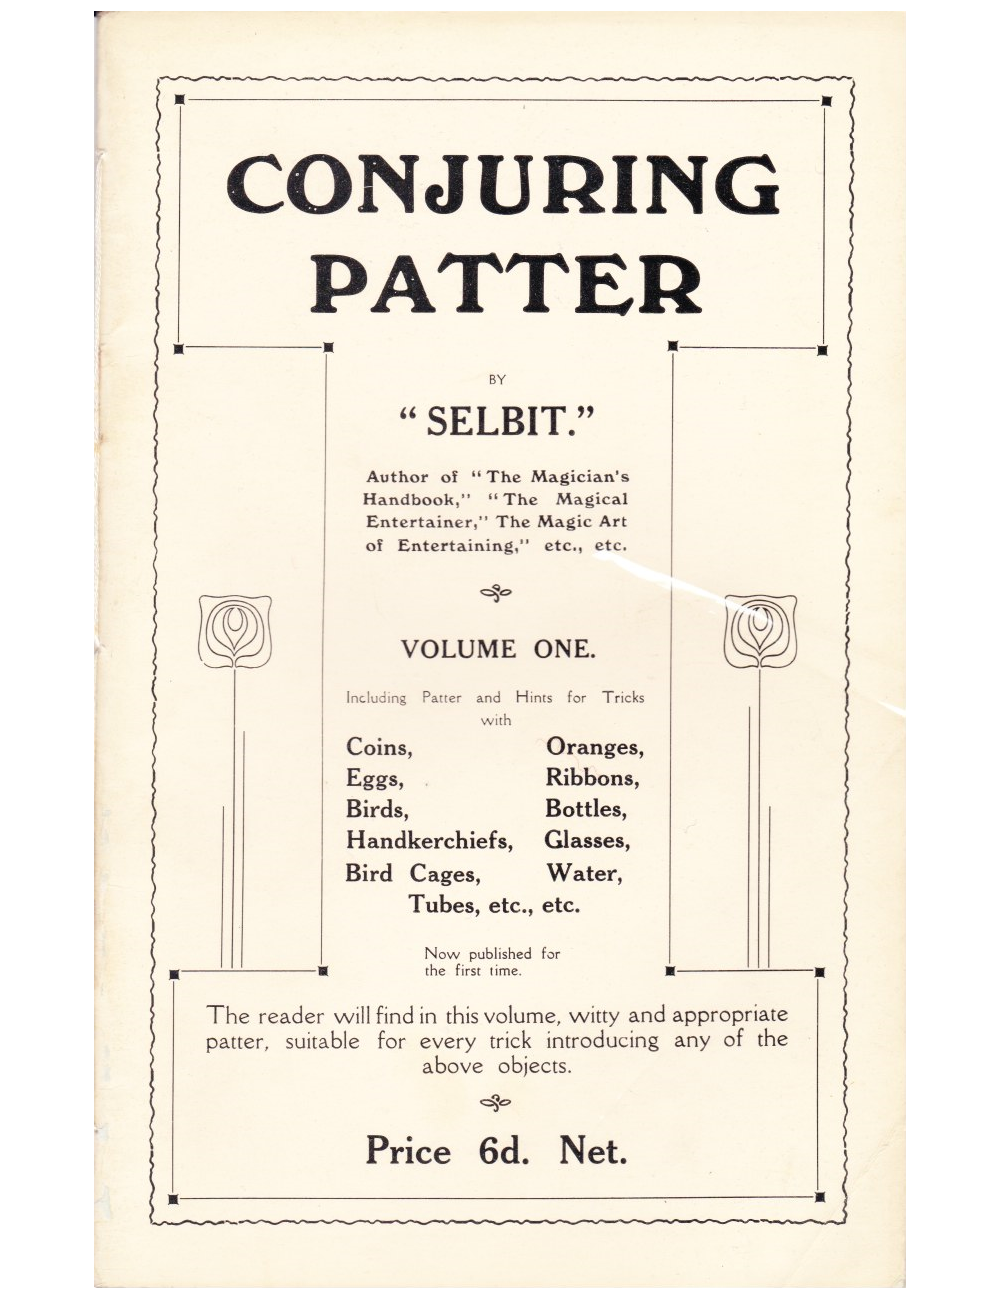 CONJURING PATTER BY SELBIT VOLUME ONE